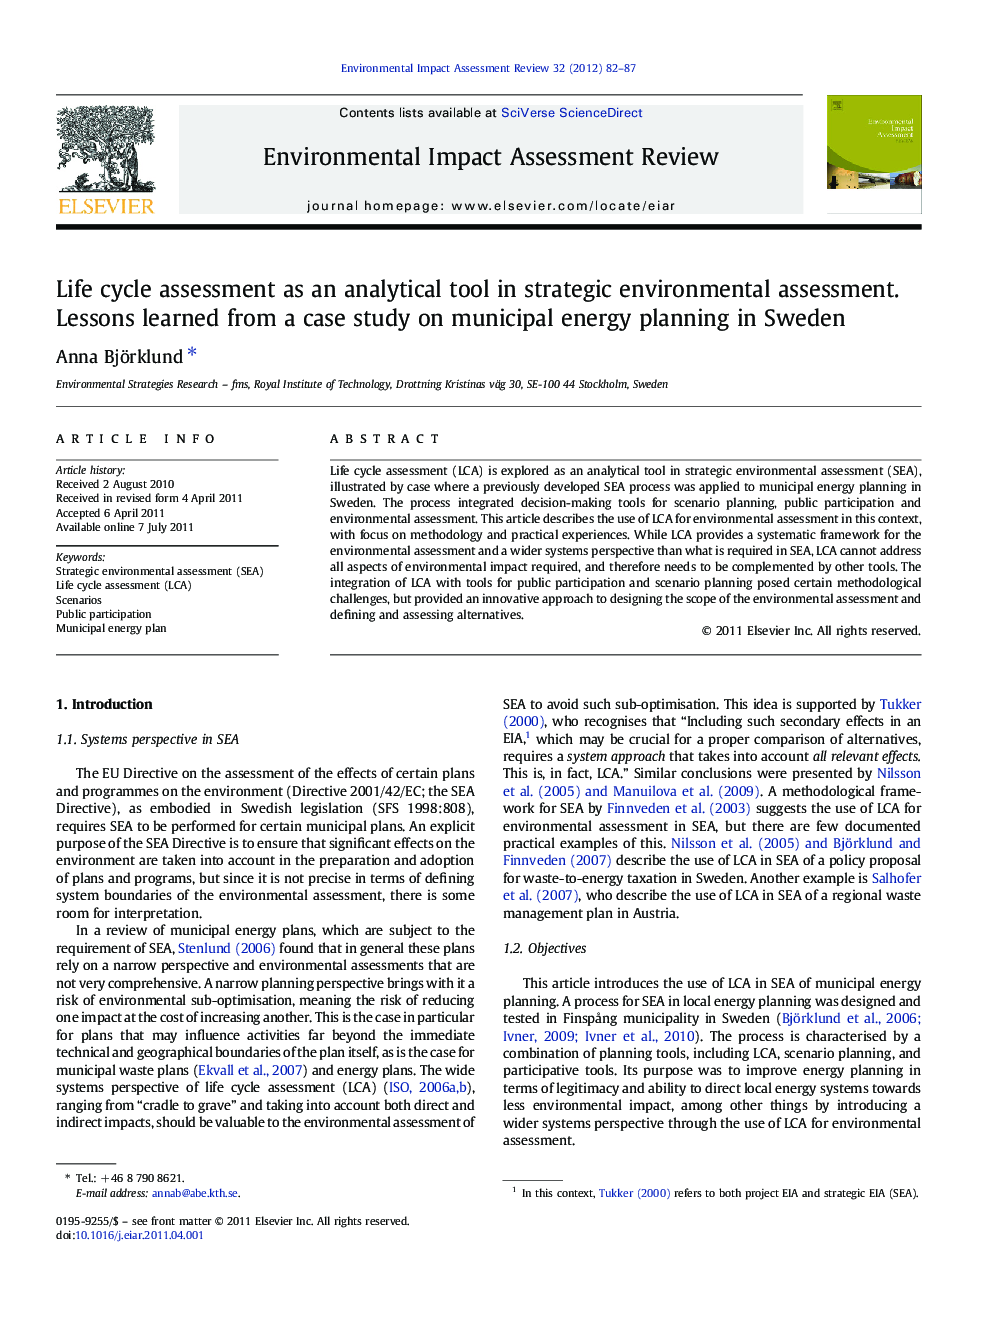 Life cycle assessment as an analytical tool in strategic environmental assessment. Lessons learned from a case study on municipal energy planning in Sweden